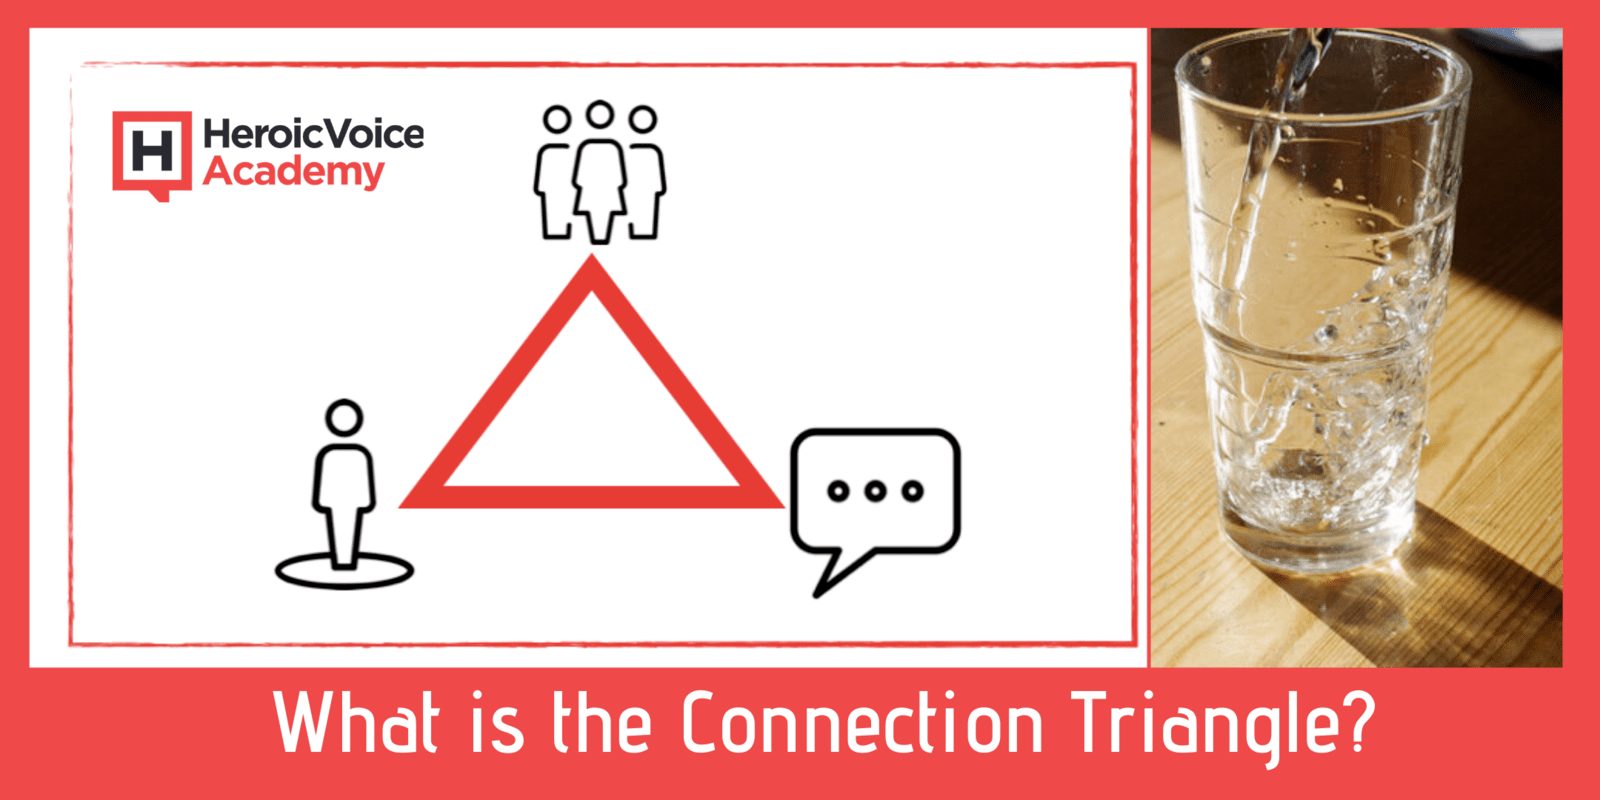 The Connection Triangle